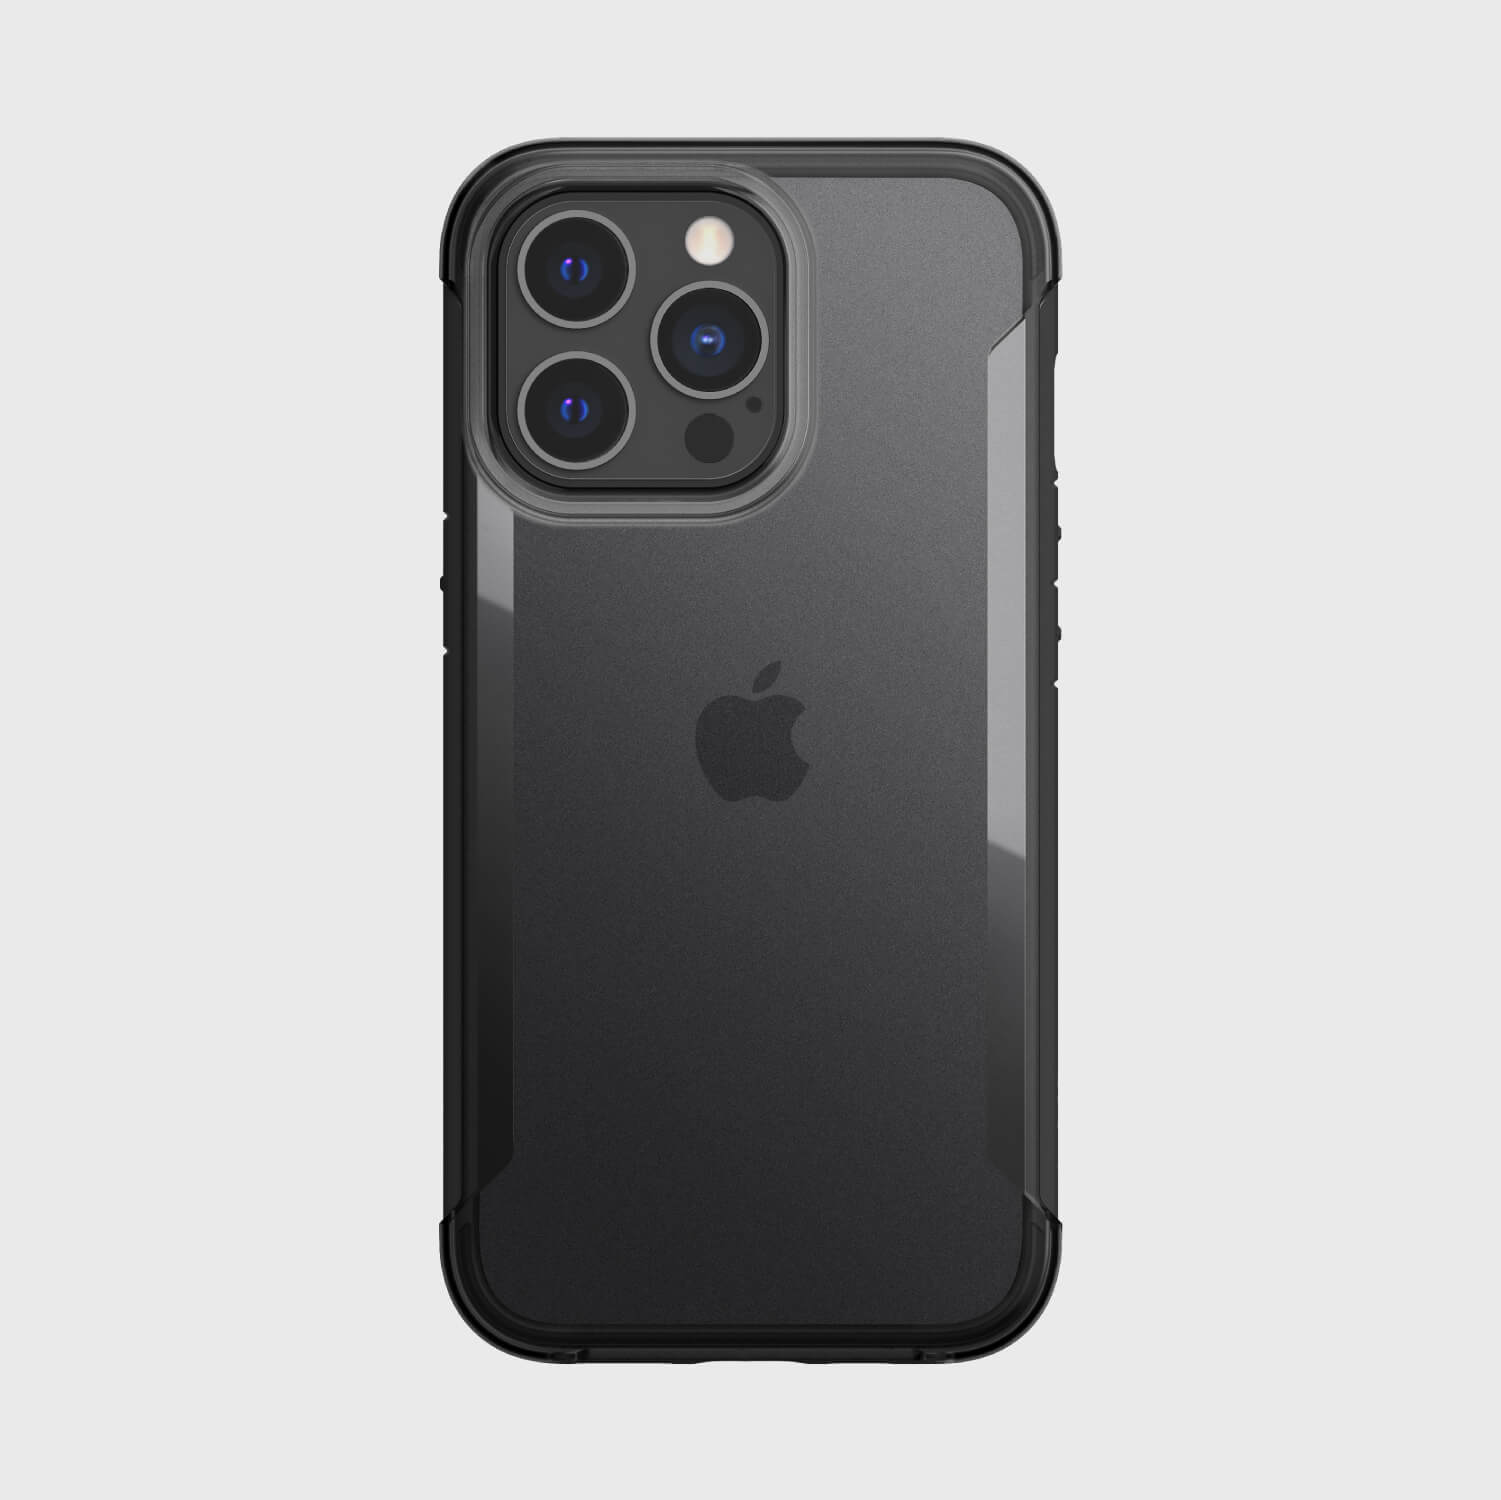 The eco-friendly black back of an iPhone 13 Pro case - TERRAIN by Raptic.